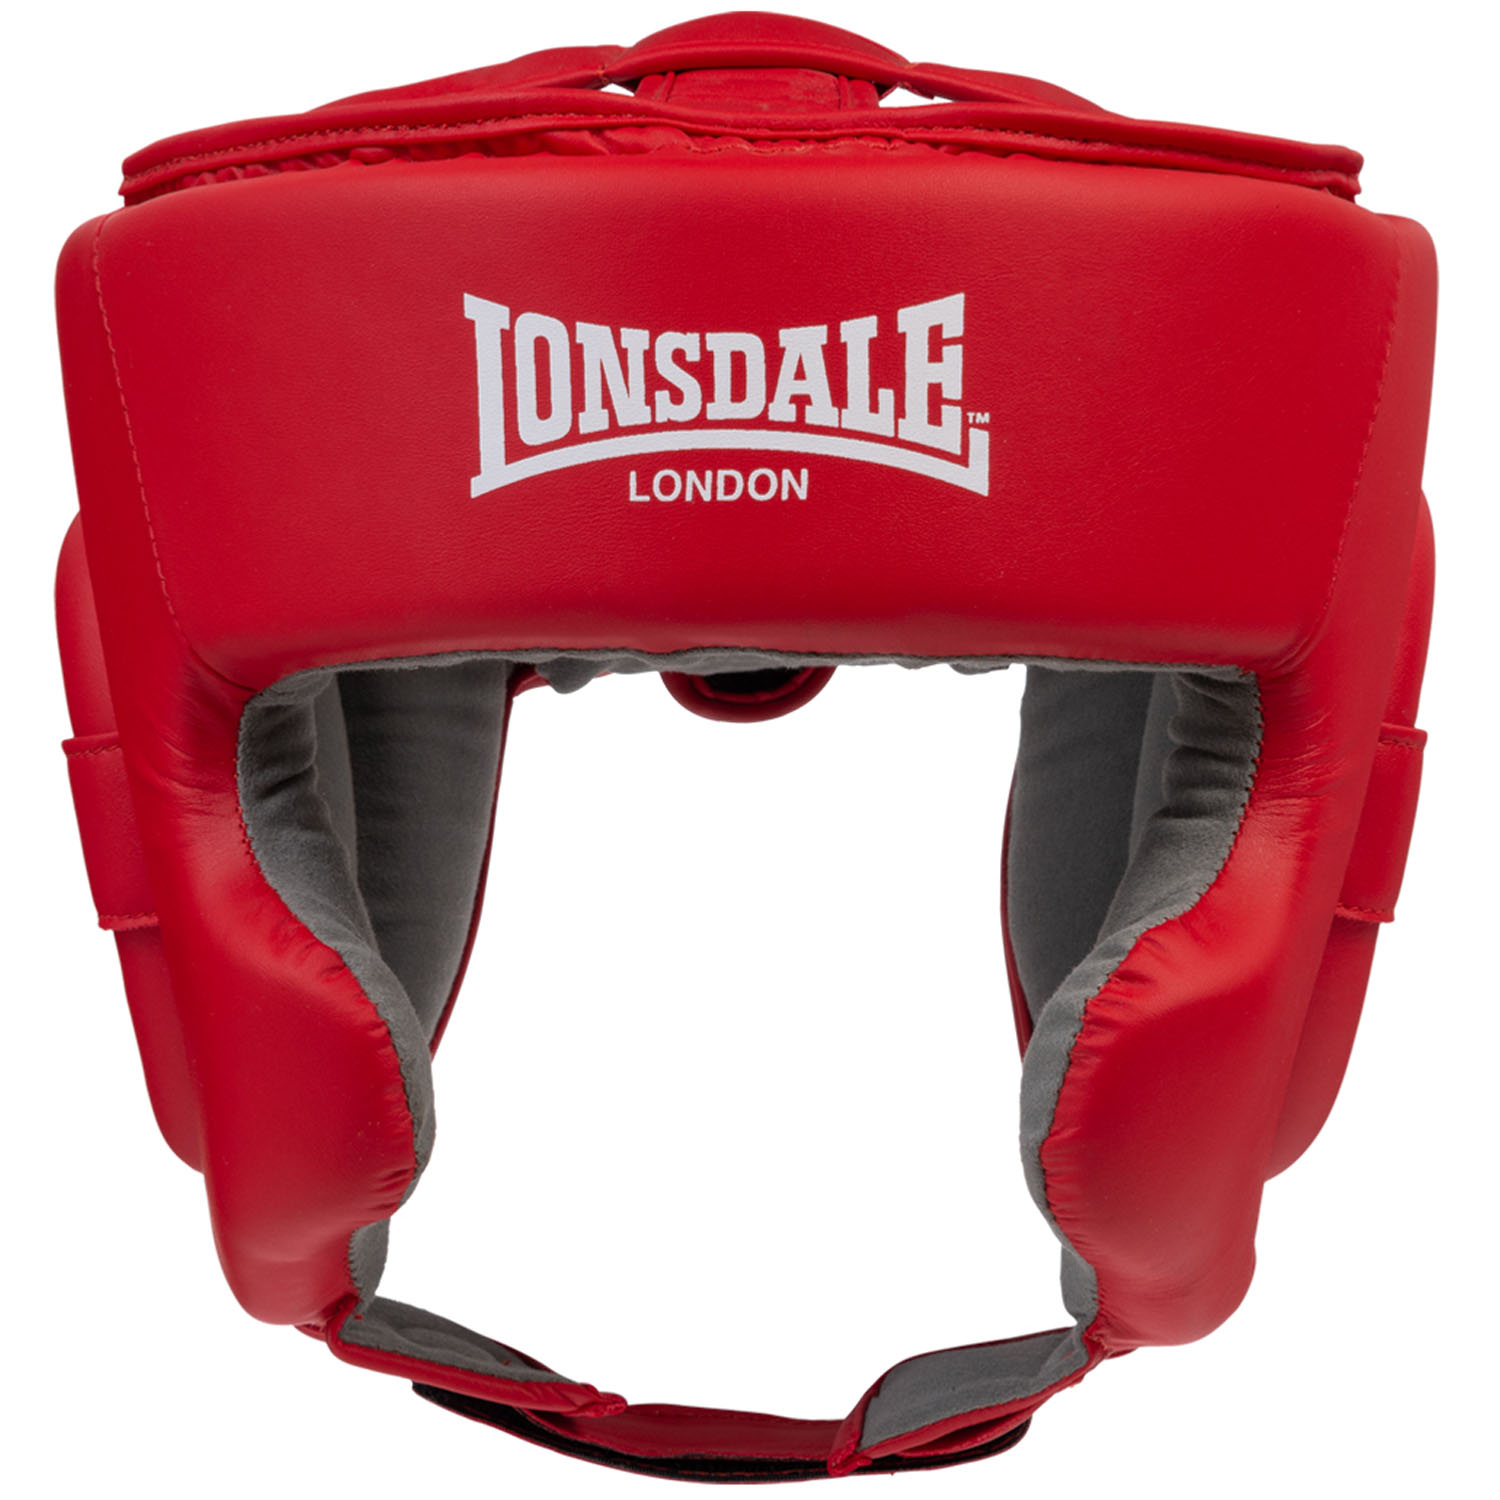 Lonsdale Head Guard, Stanford, red, L/XL